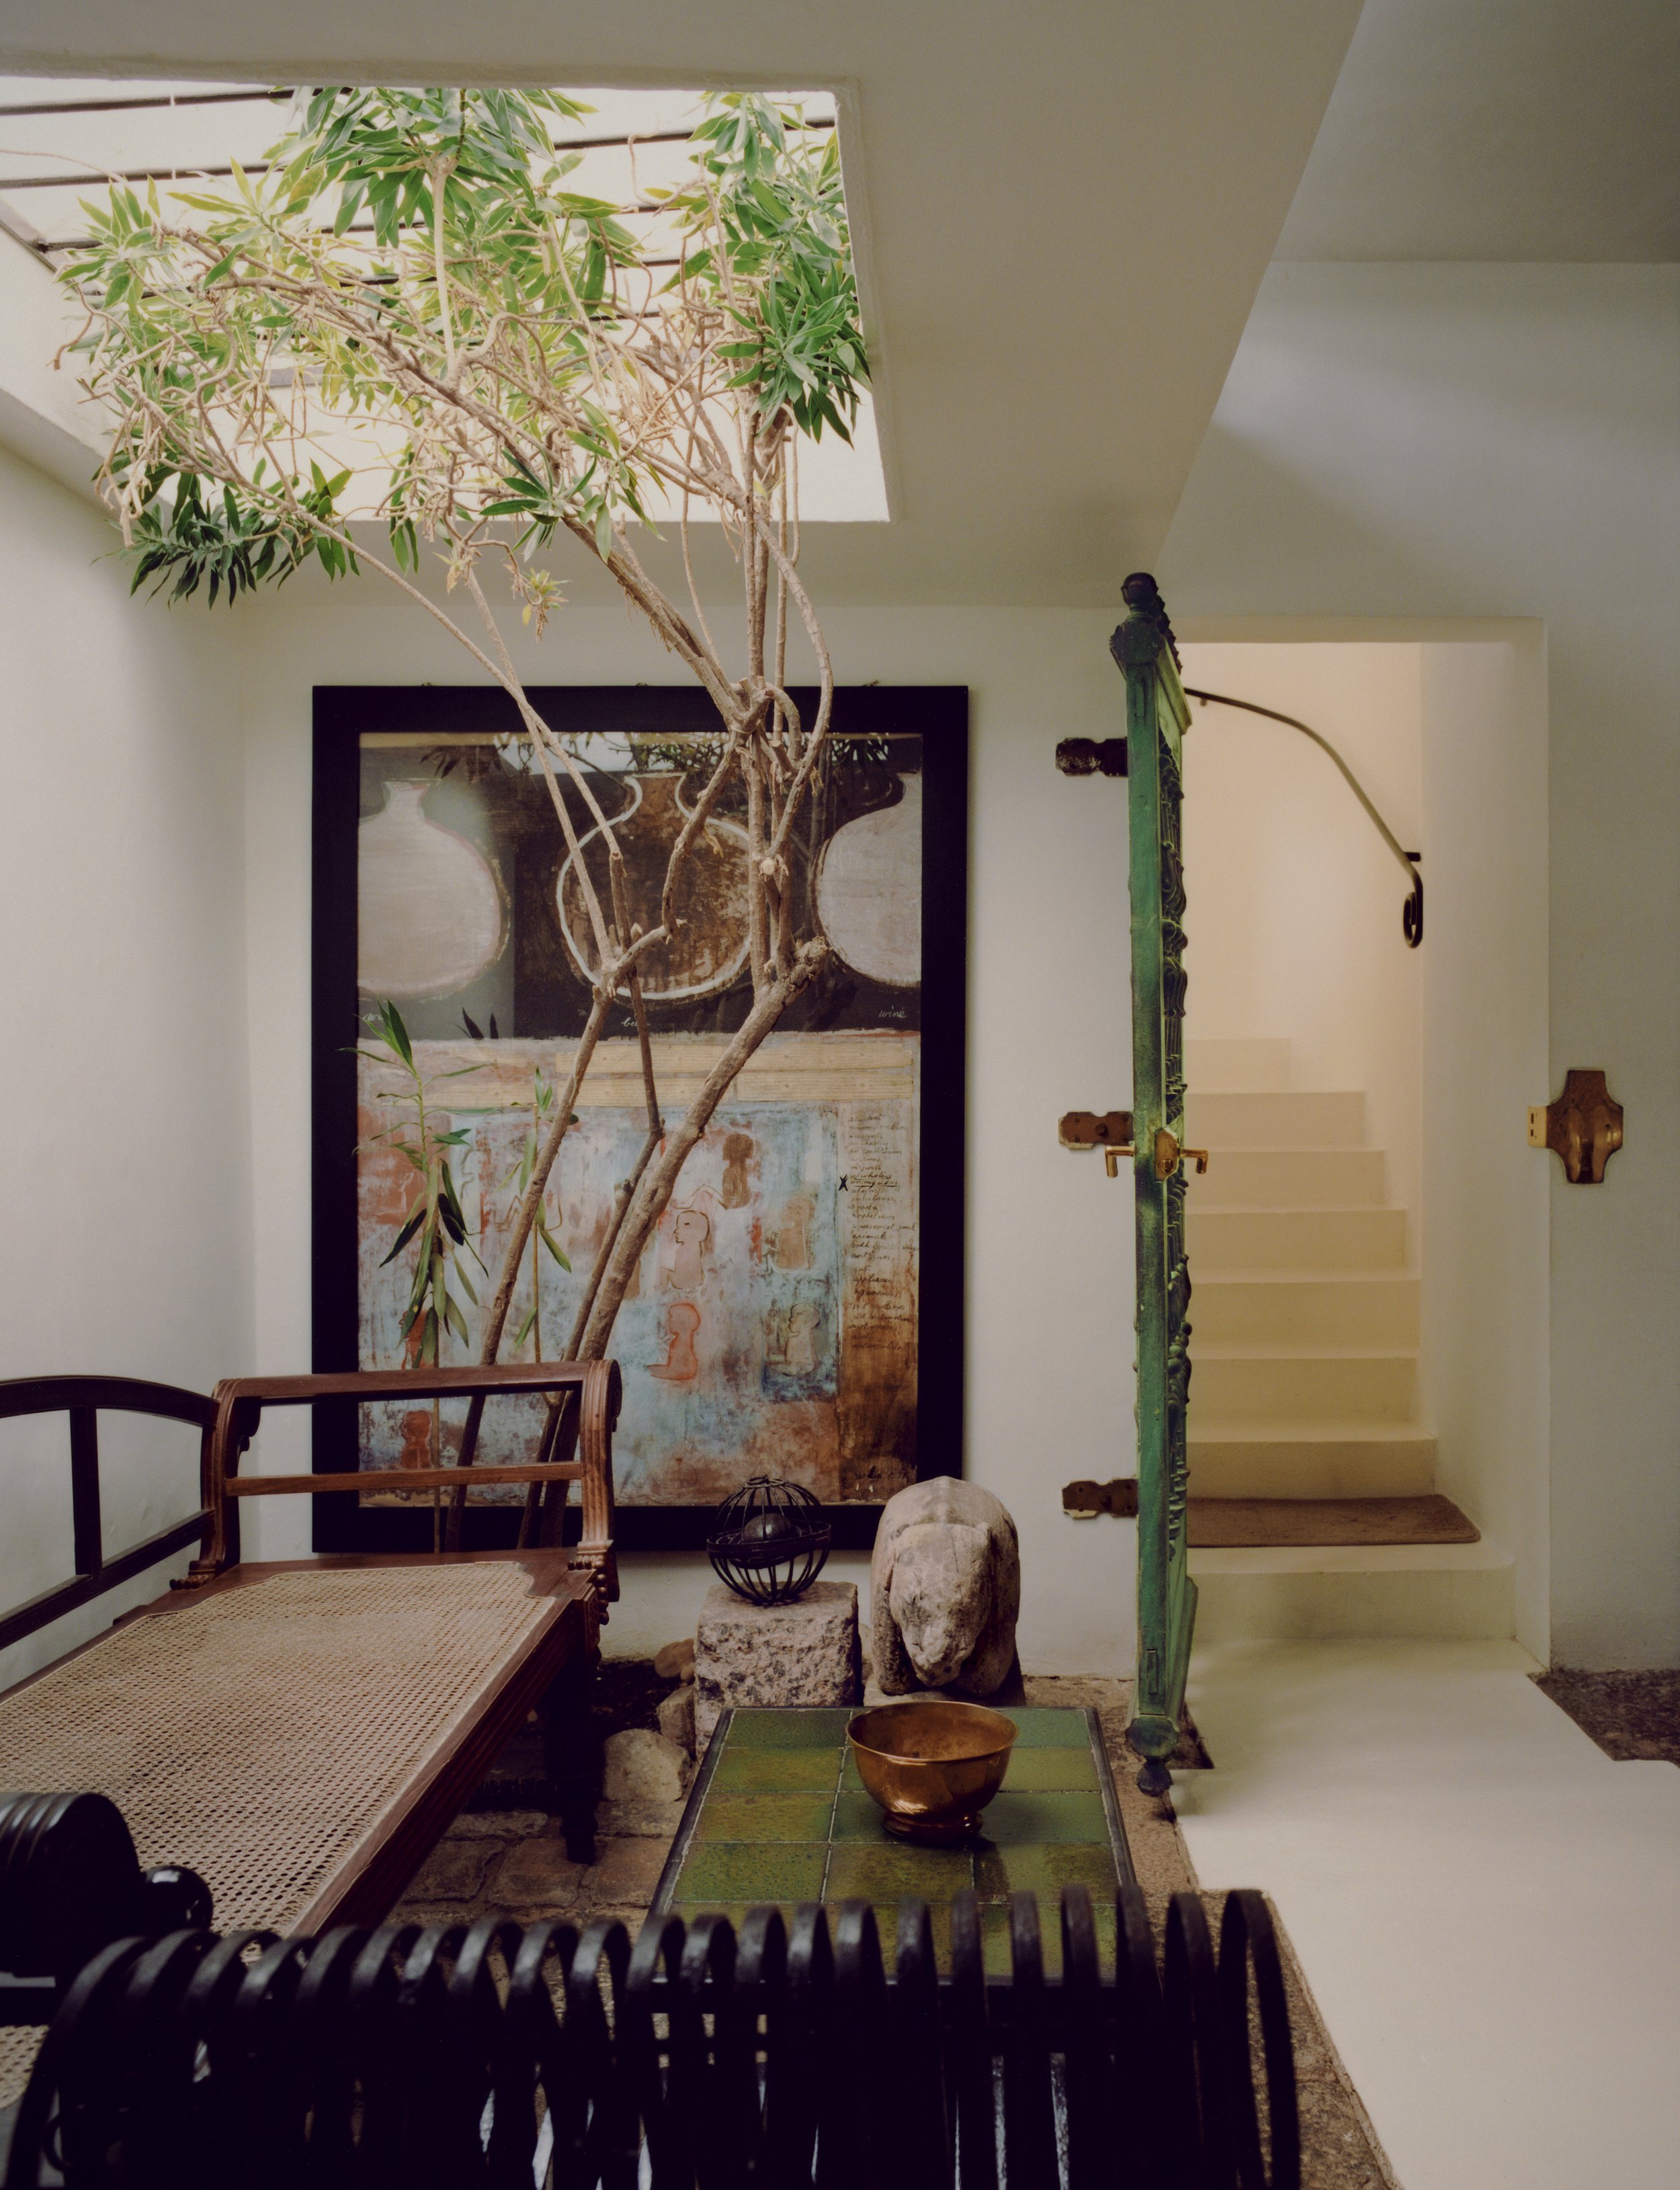  Architect Geoffrey Bawa’s home, Number 11.  Colombo, Sri Lanka. For The World of Interiors.  